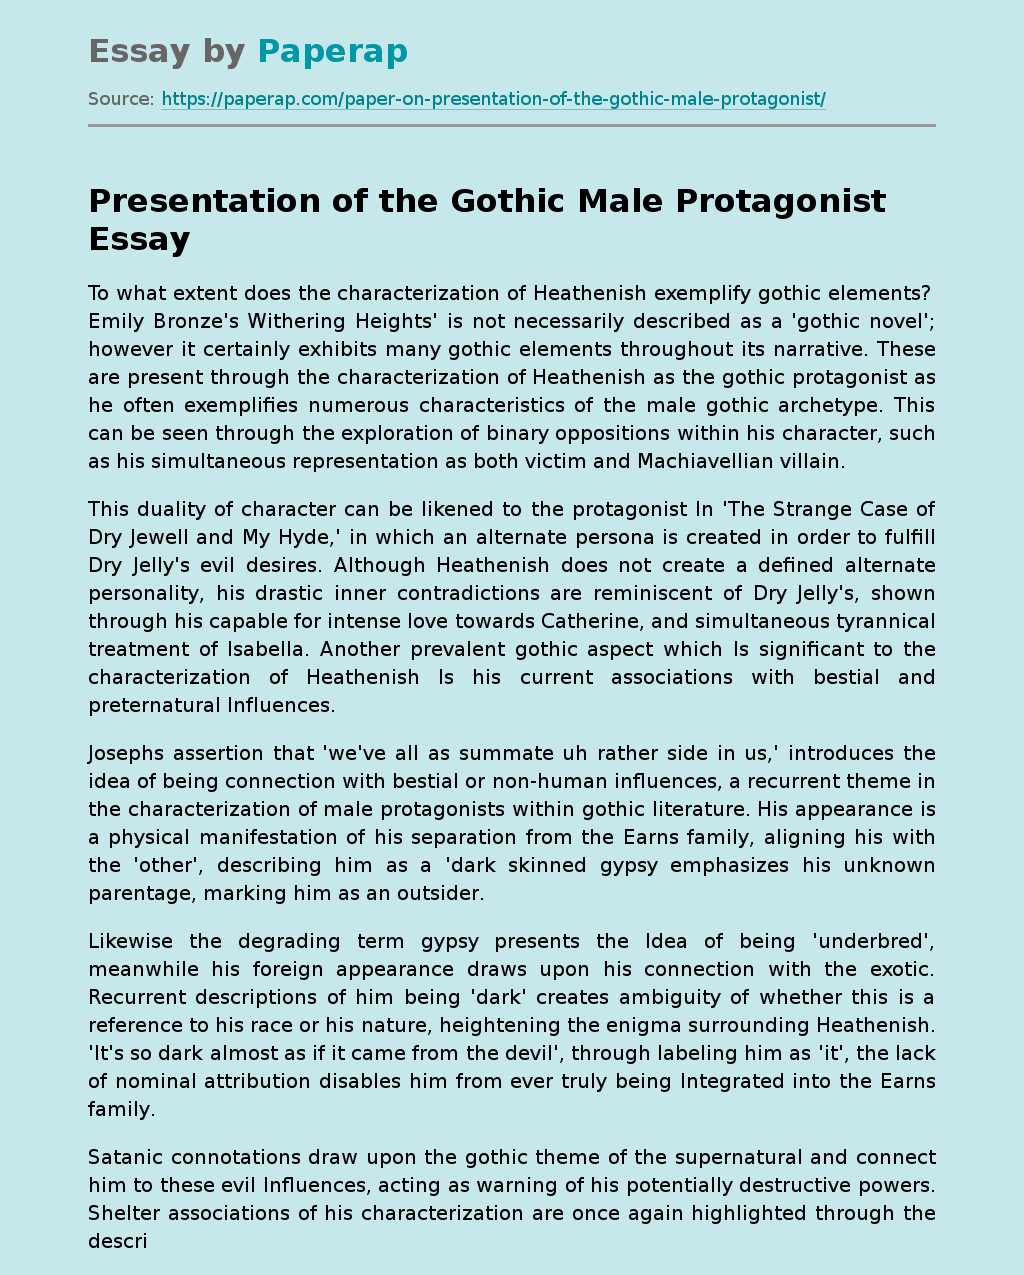 Presentation of the Gothic Male Protagonist